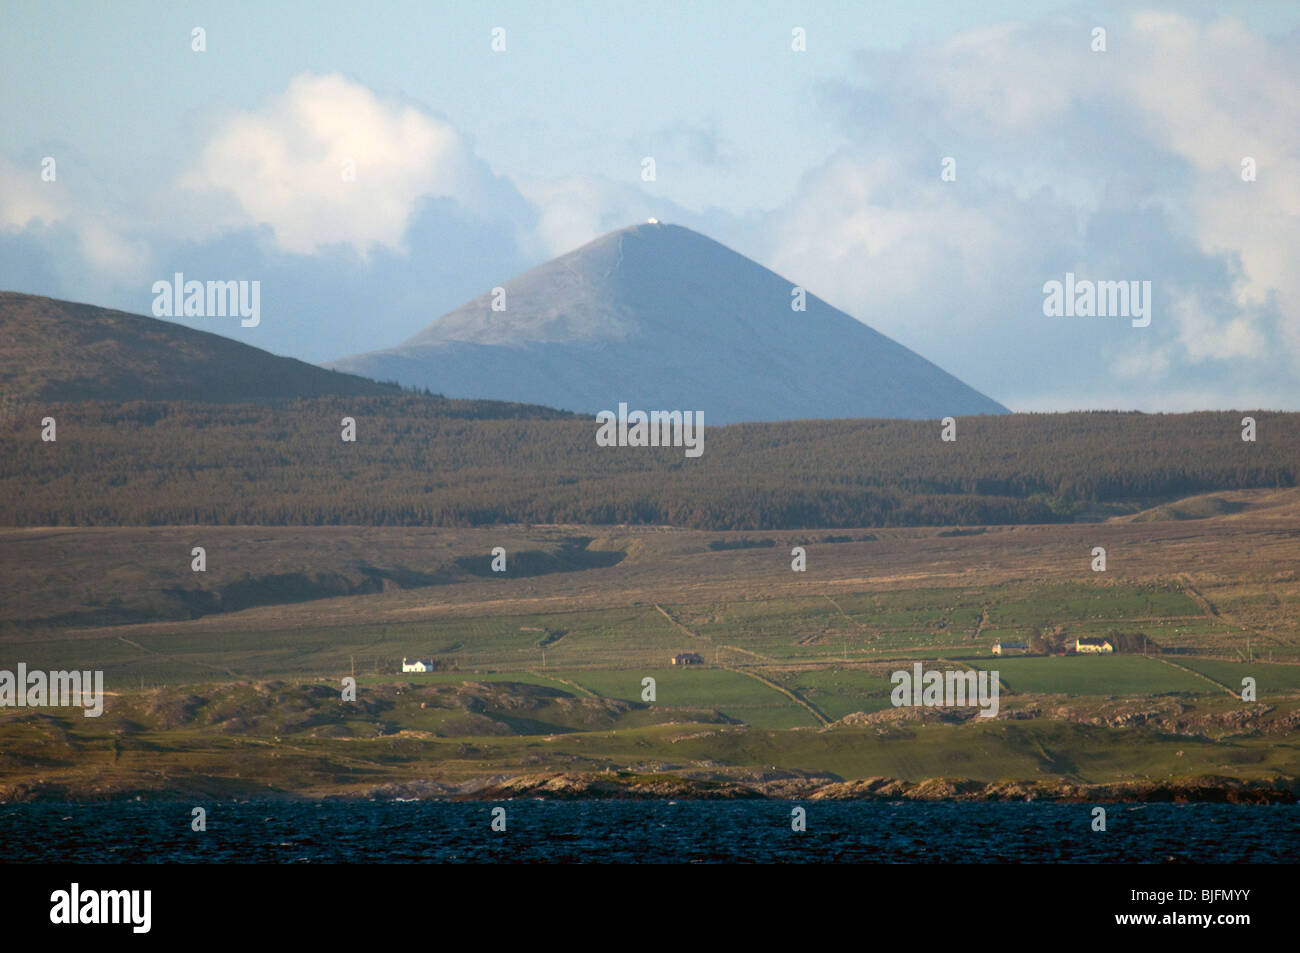 A telephoto shot of Croagh Patrick (about 27km or 16.7 miles away), from Renvyle Beach, Connemara, County Galway, Ireland Stock Photo